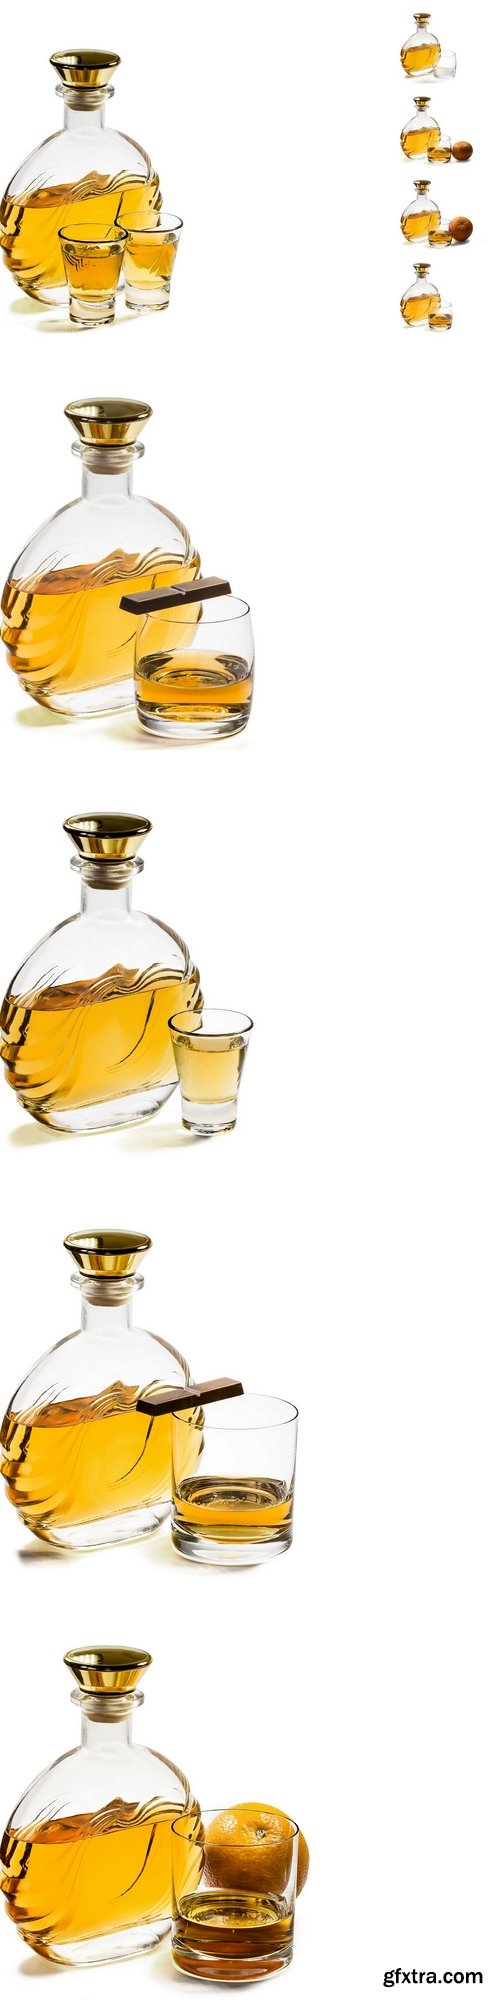 Bottle and shot glass tequila 2